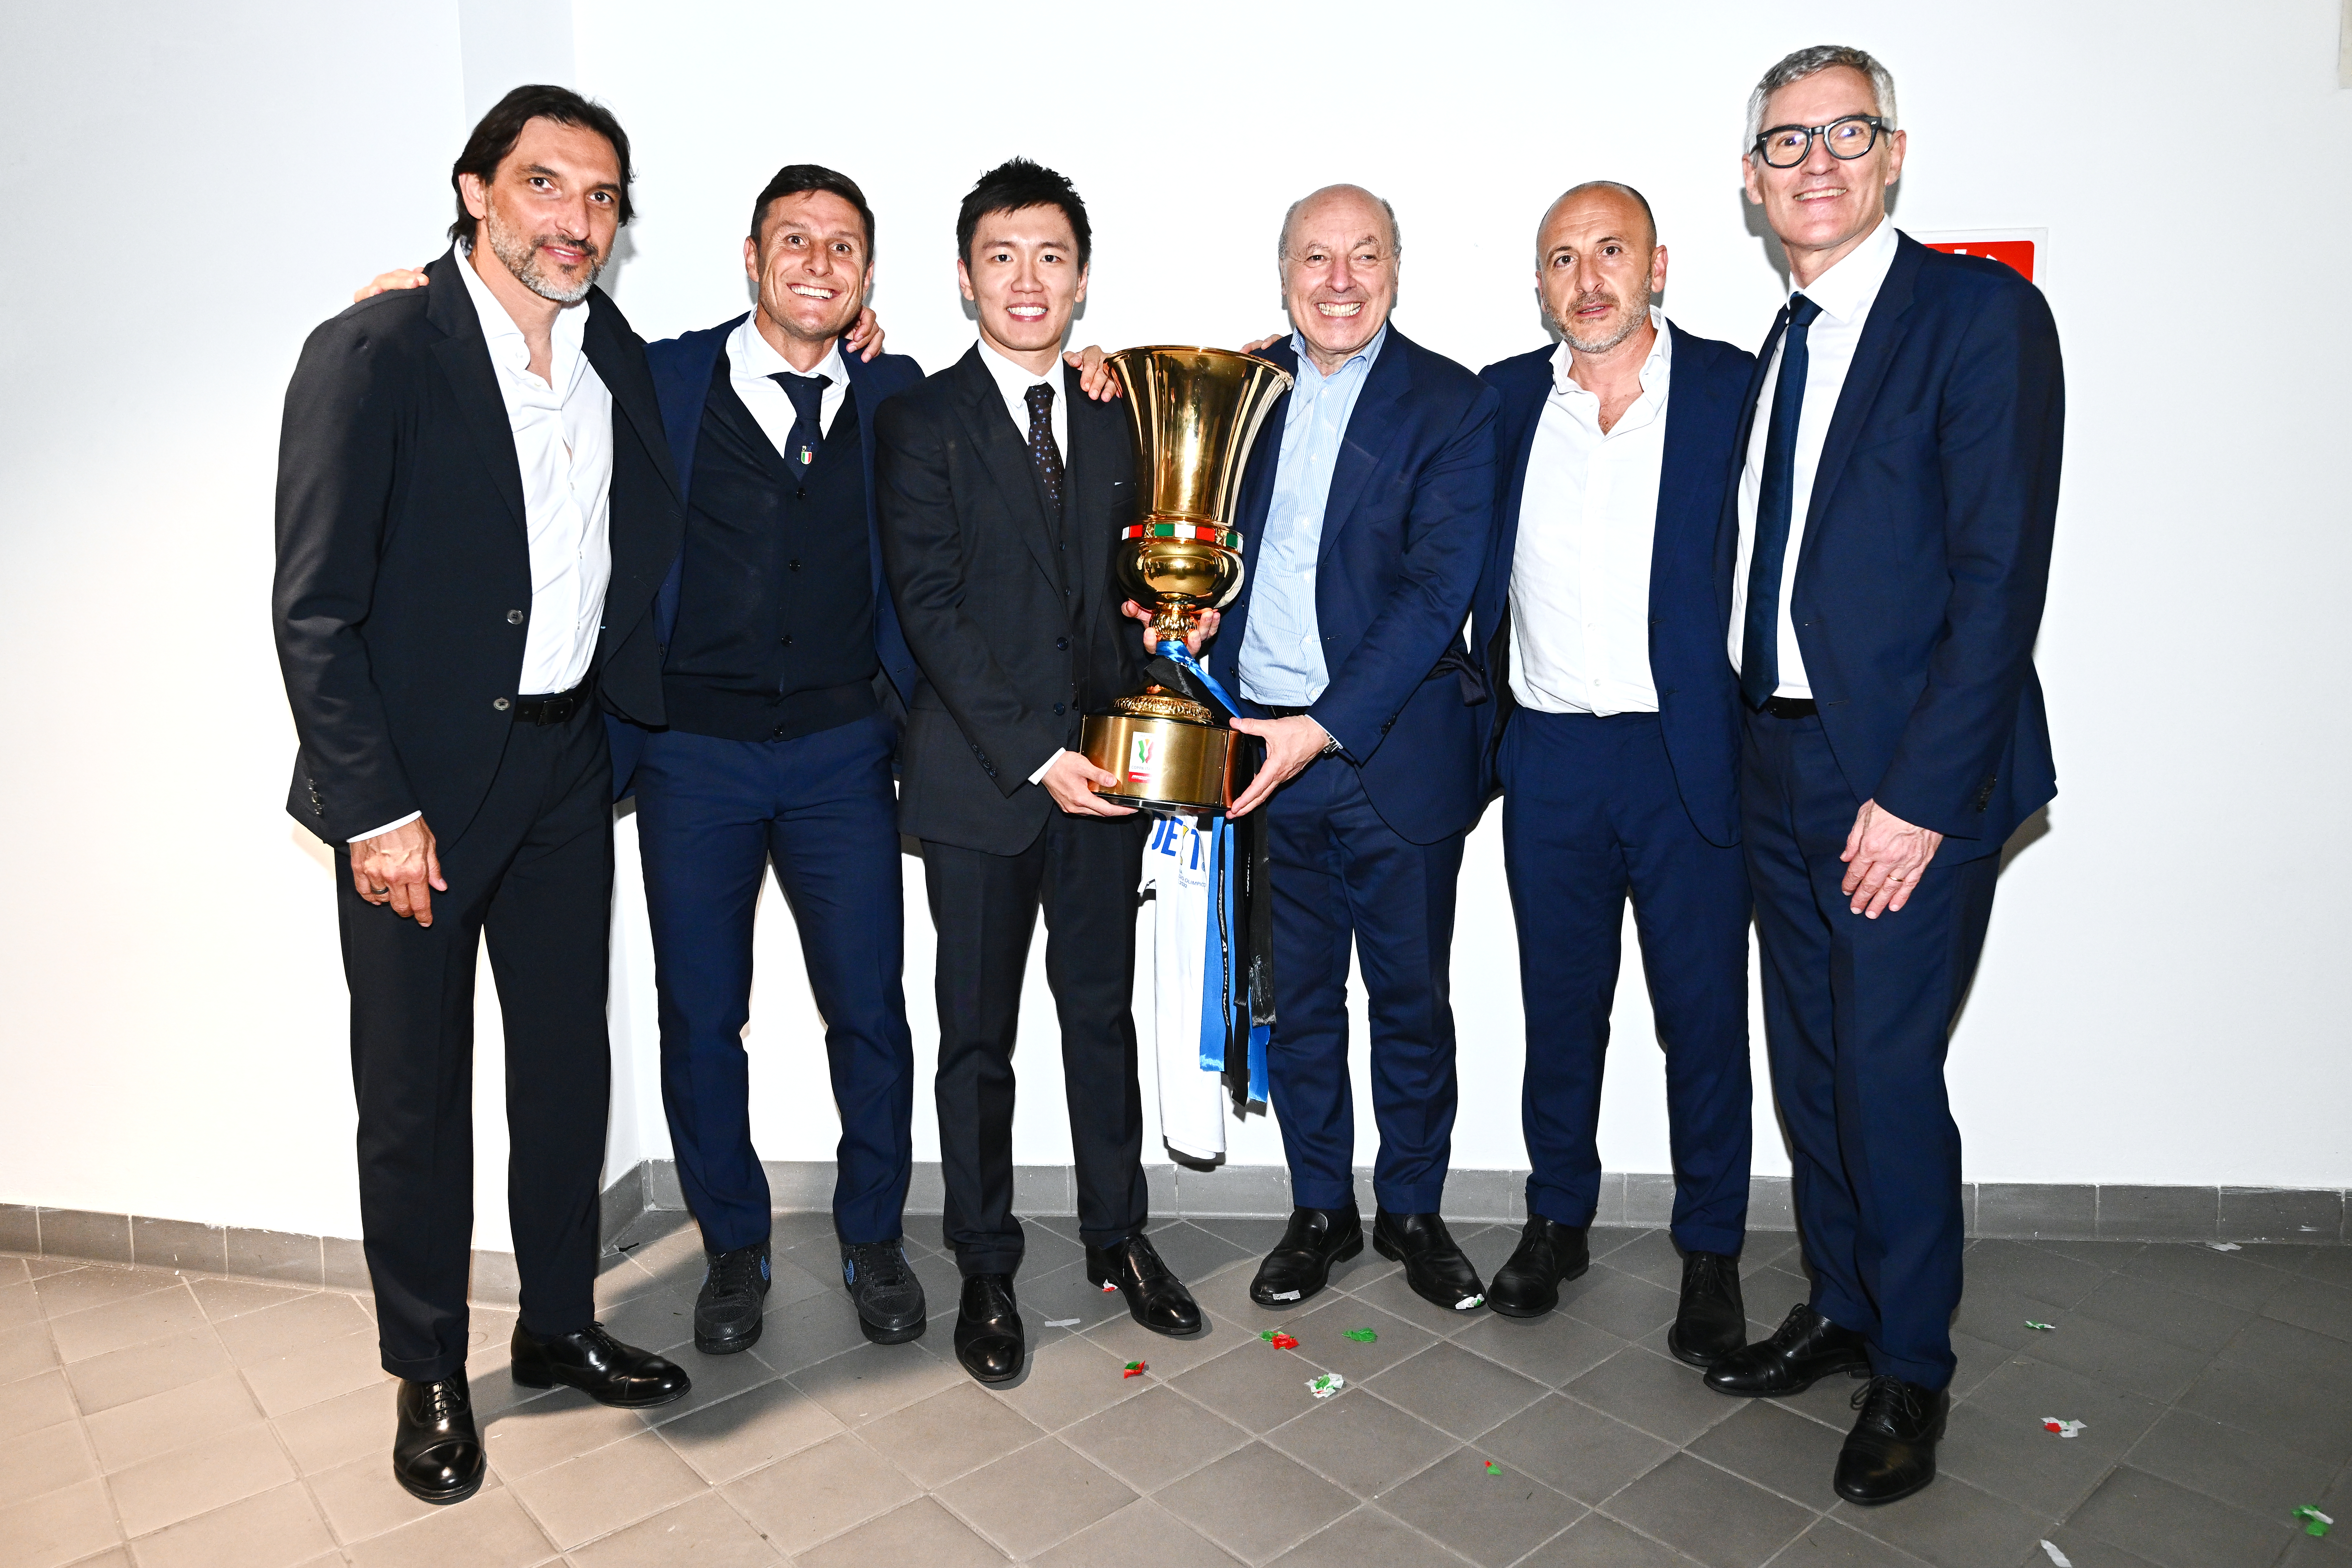 A Bunch of guys in suits hold a trophy in a boring white room